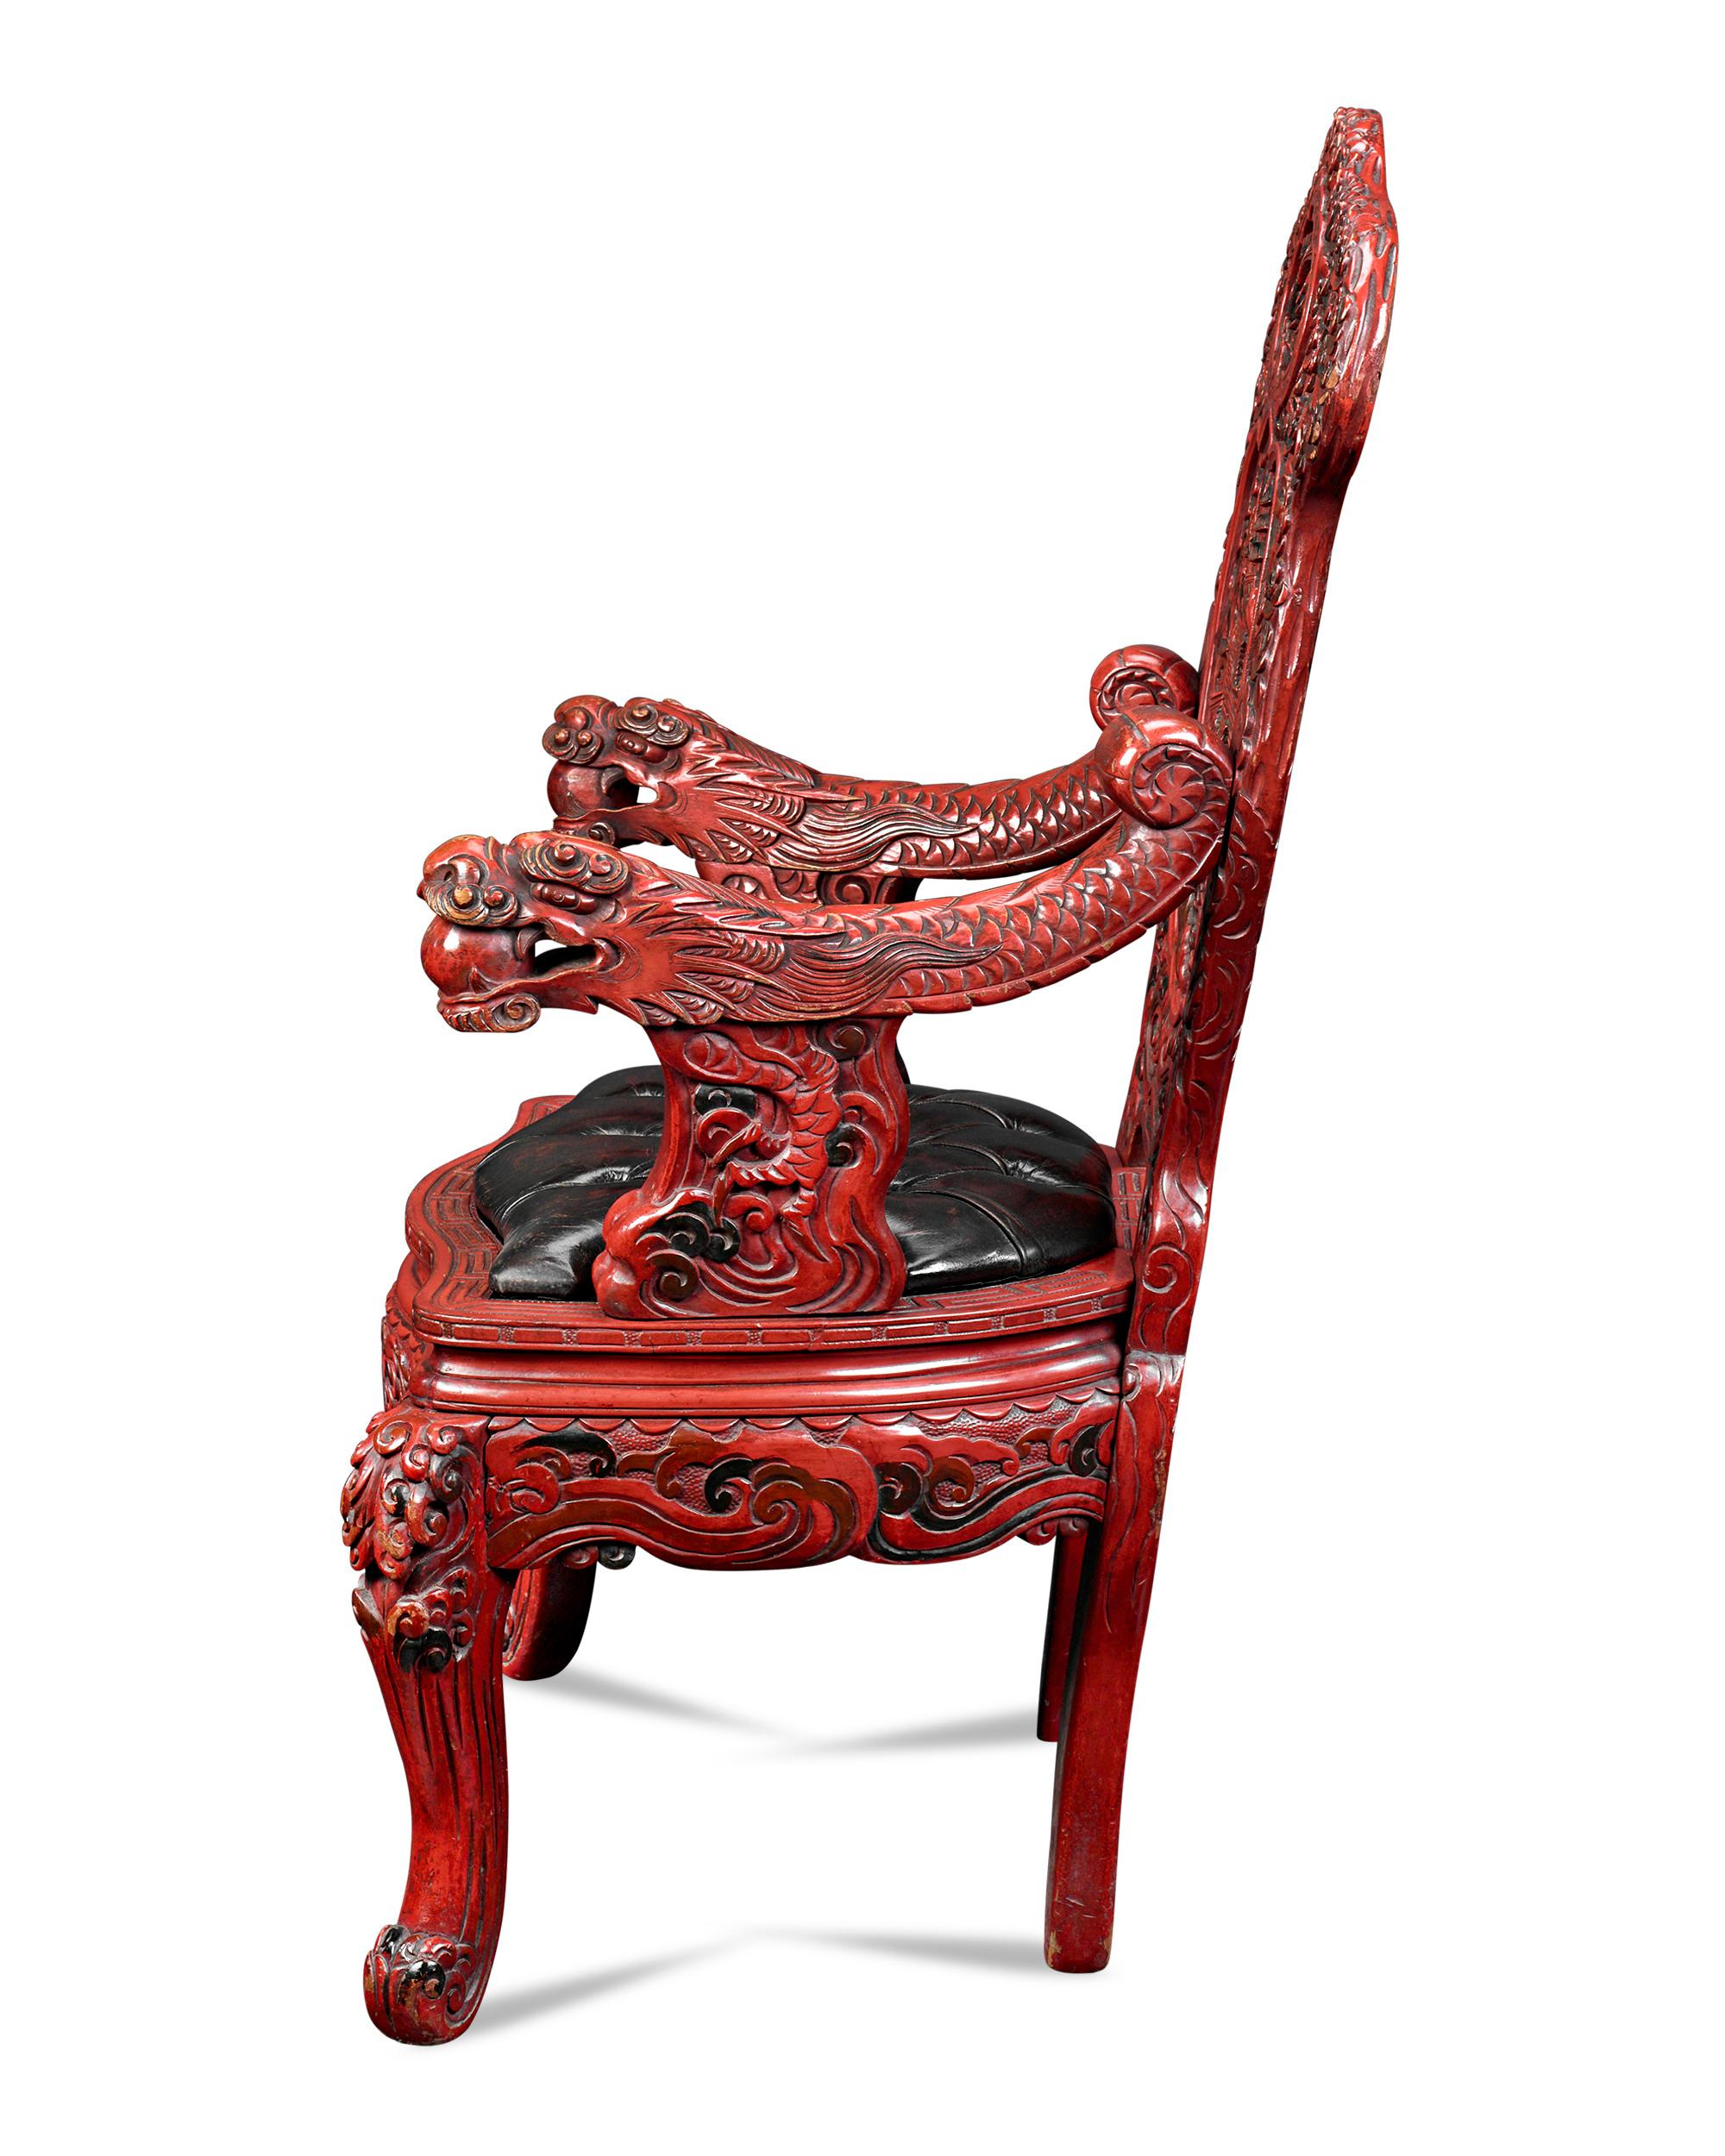 Qing Pair of Lacquered Chinese Throne Chairs